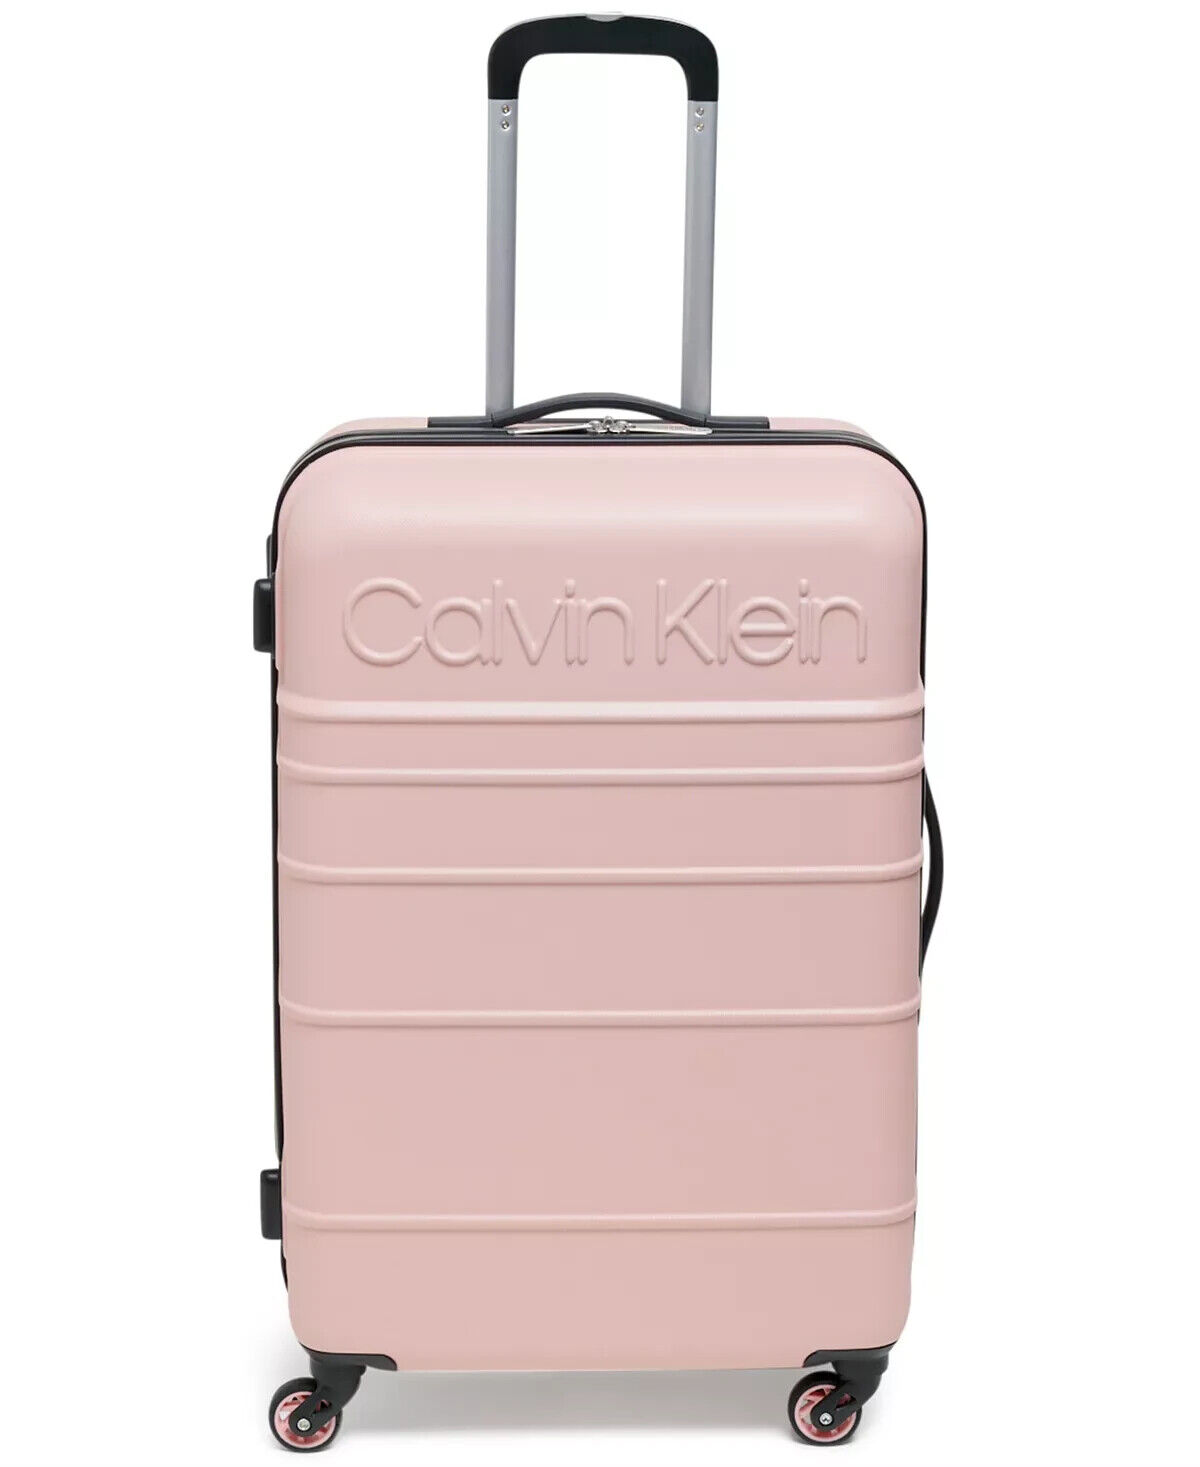 Calvin Klein Fillmore Hard Side Luggage SILVER PINK check in size 24